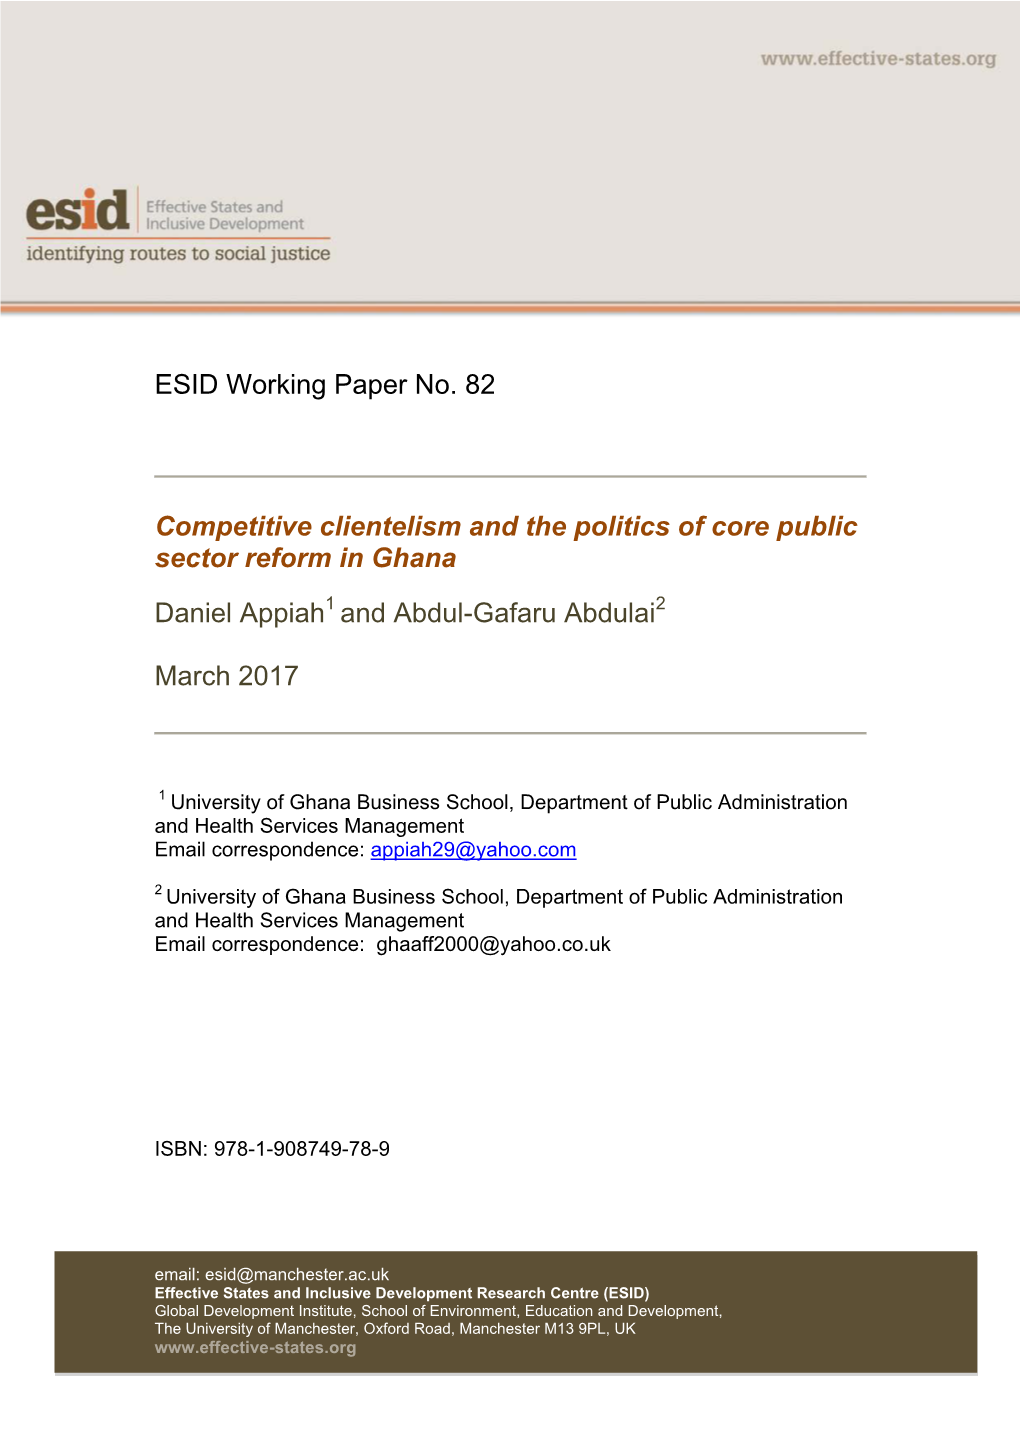 Competitive Clientelism and the Politics of Core Public Sector Reform in Ghana